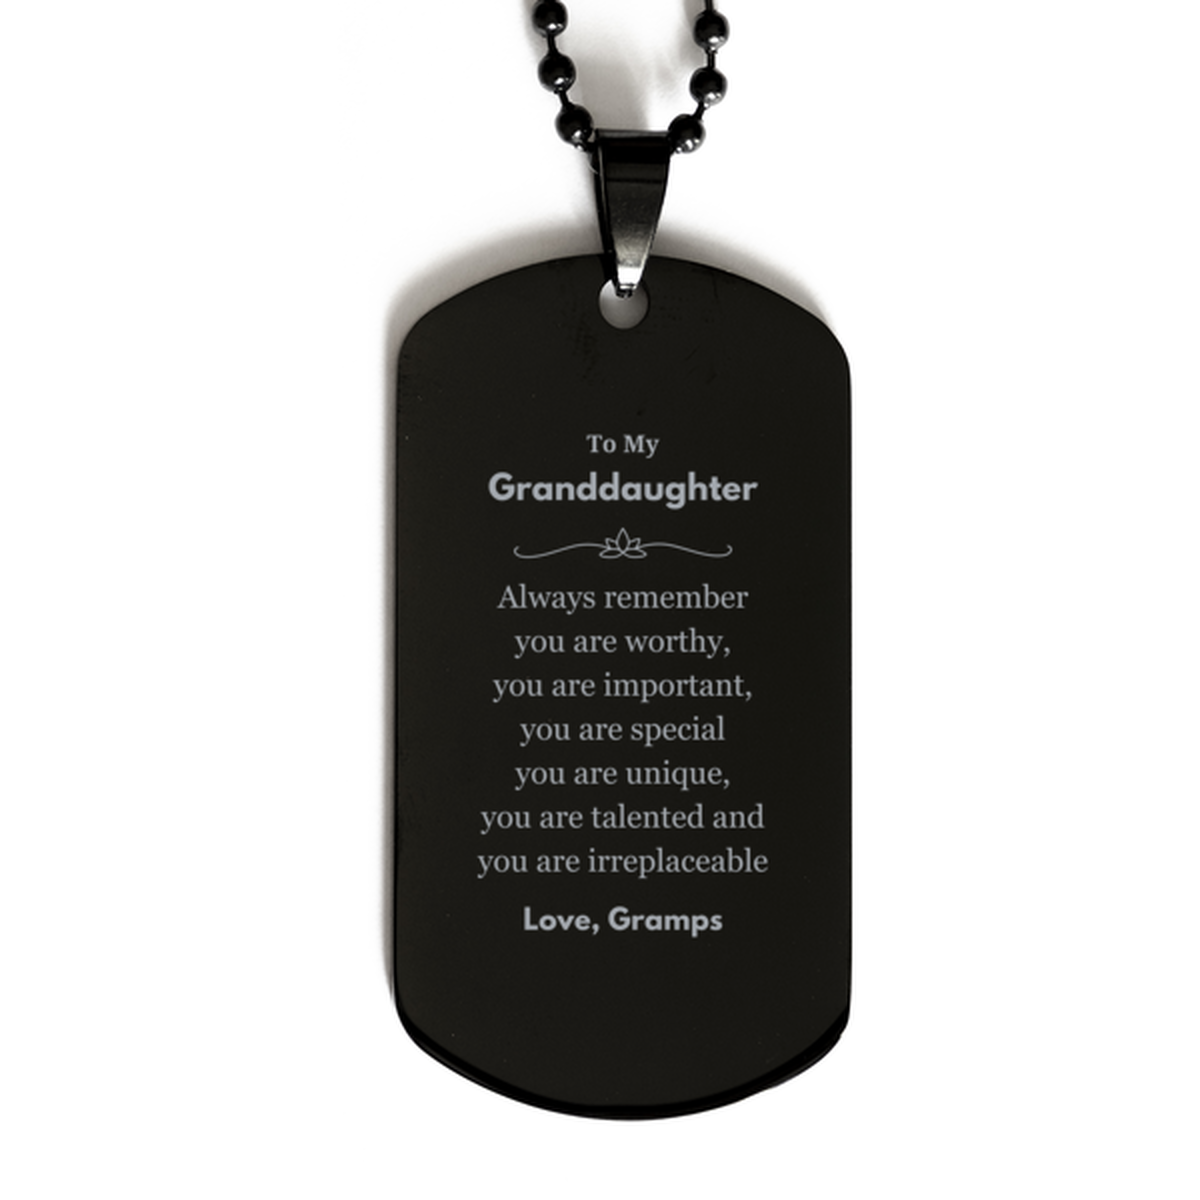 Granddaughter Birthday Gifts from Gramps, Inspirational Black Dog Tag for Granddaughter Christmas Graduation Gifts for Granddaughter Always remember you are worthy, you are important. Love, Gramps